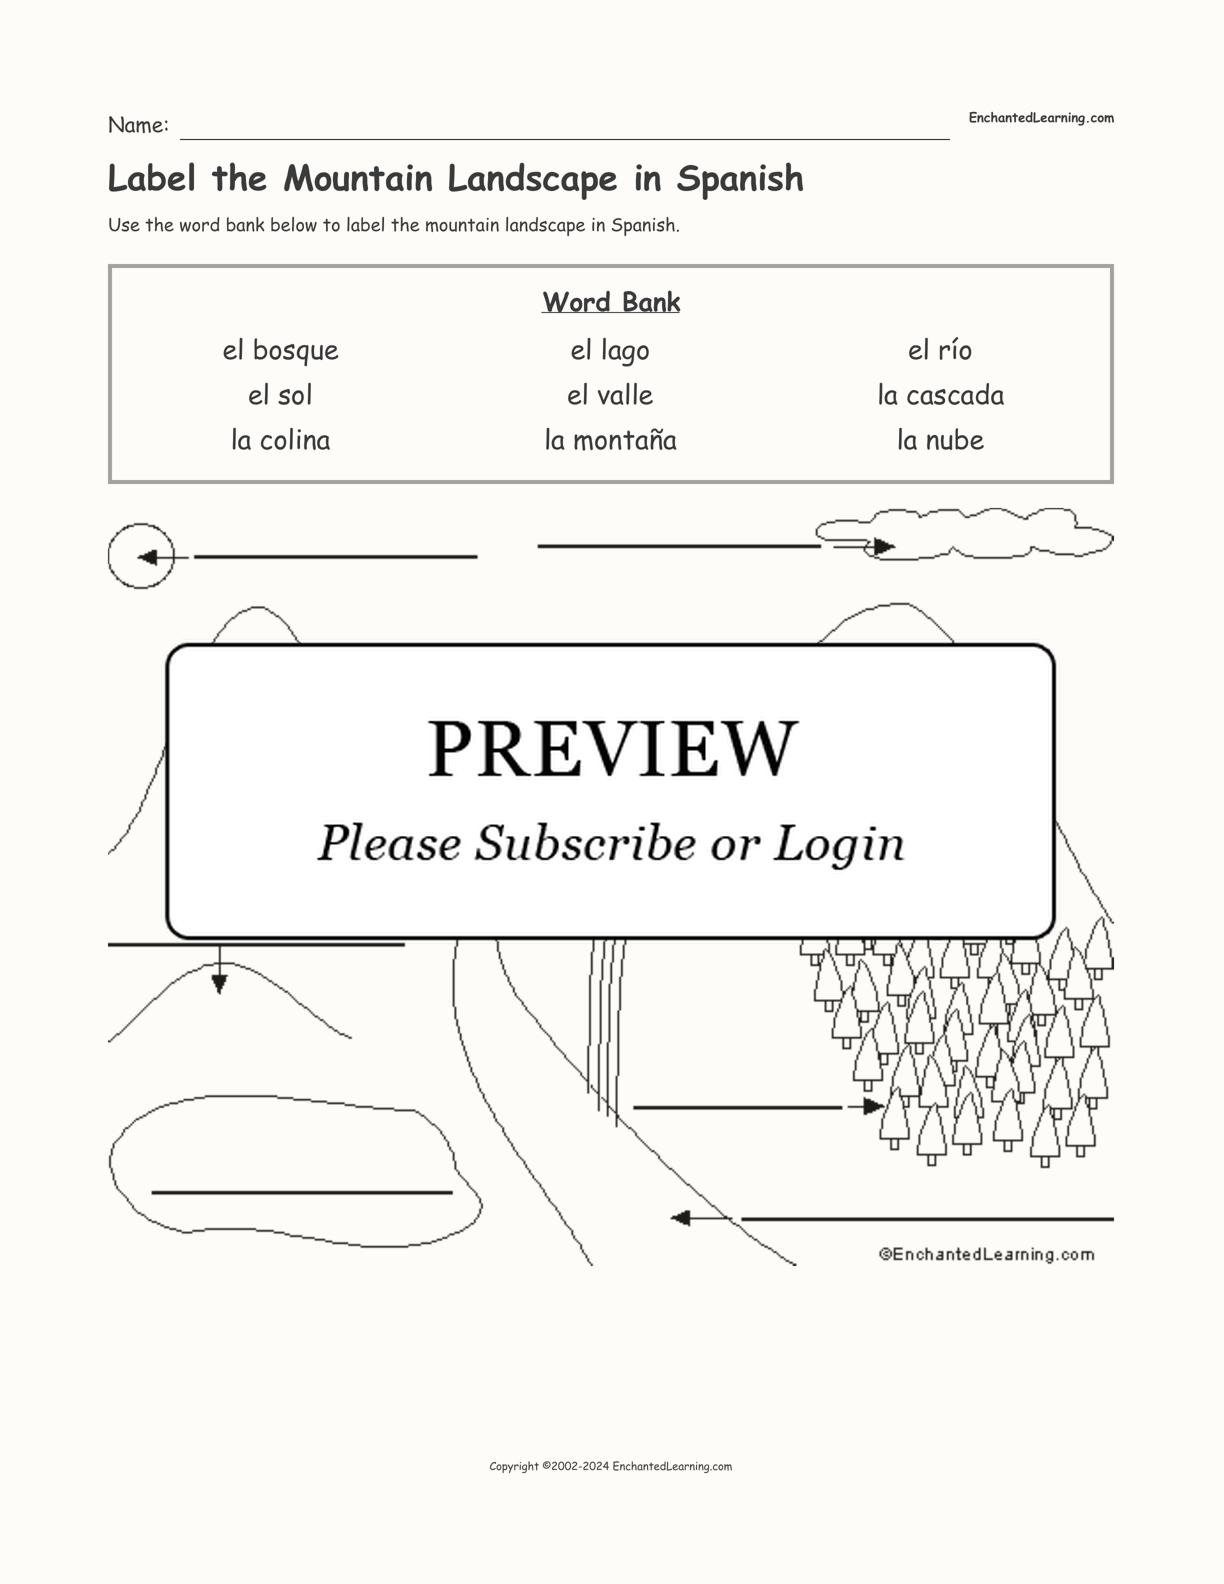 Label the Mountain Landscape in Spanish interactive worksheet page 1